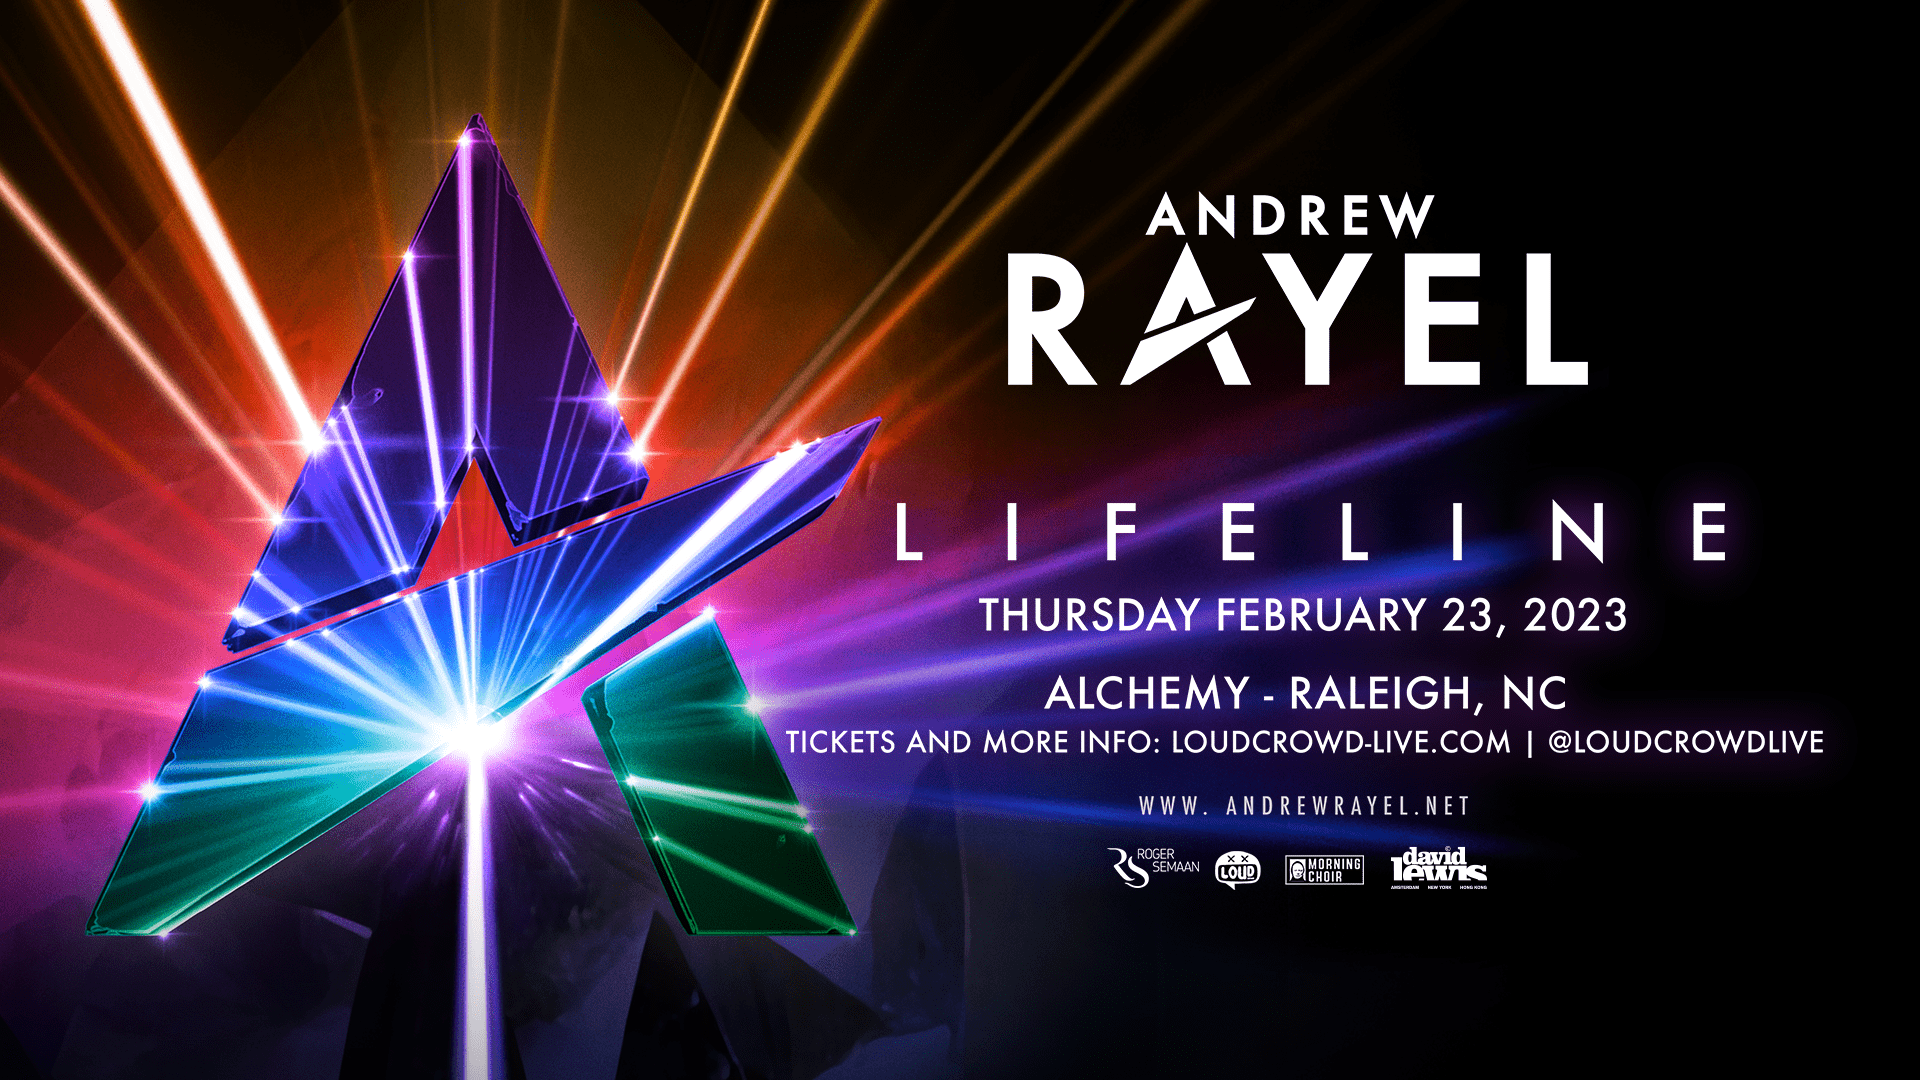 Andrew Rayel Lifeline Tour Tickets at Alchemy in Raleigh by Loud